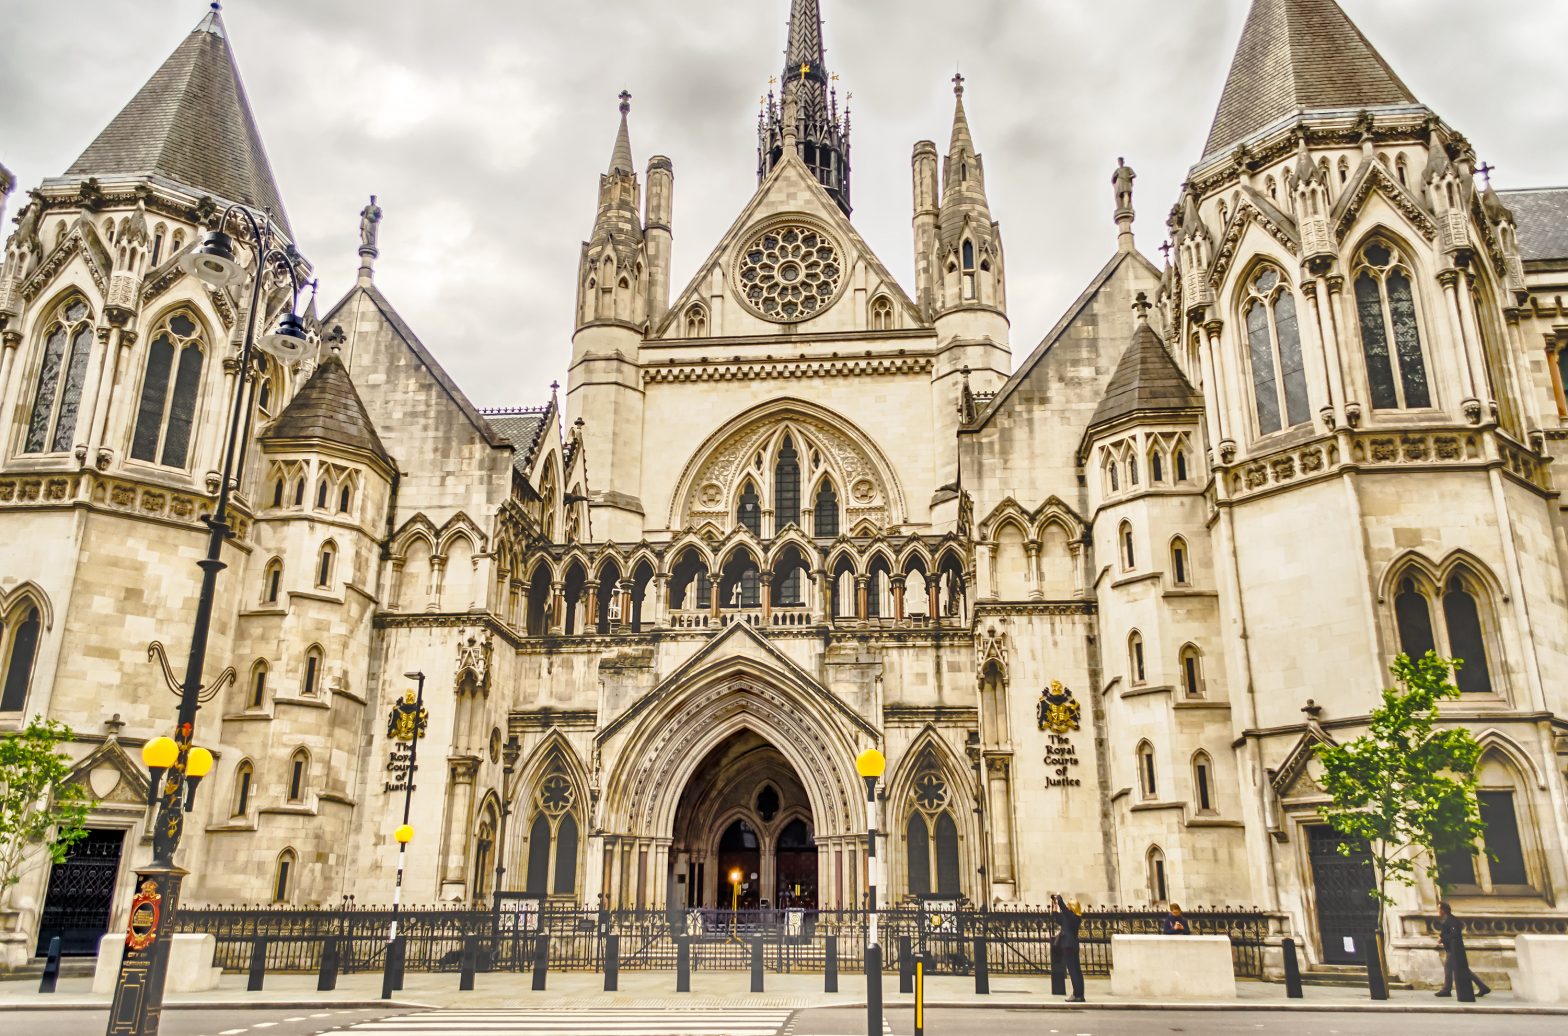 Main entrance of the Royal Courts of Justice on the Strand, London, UK